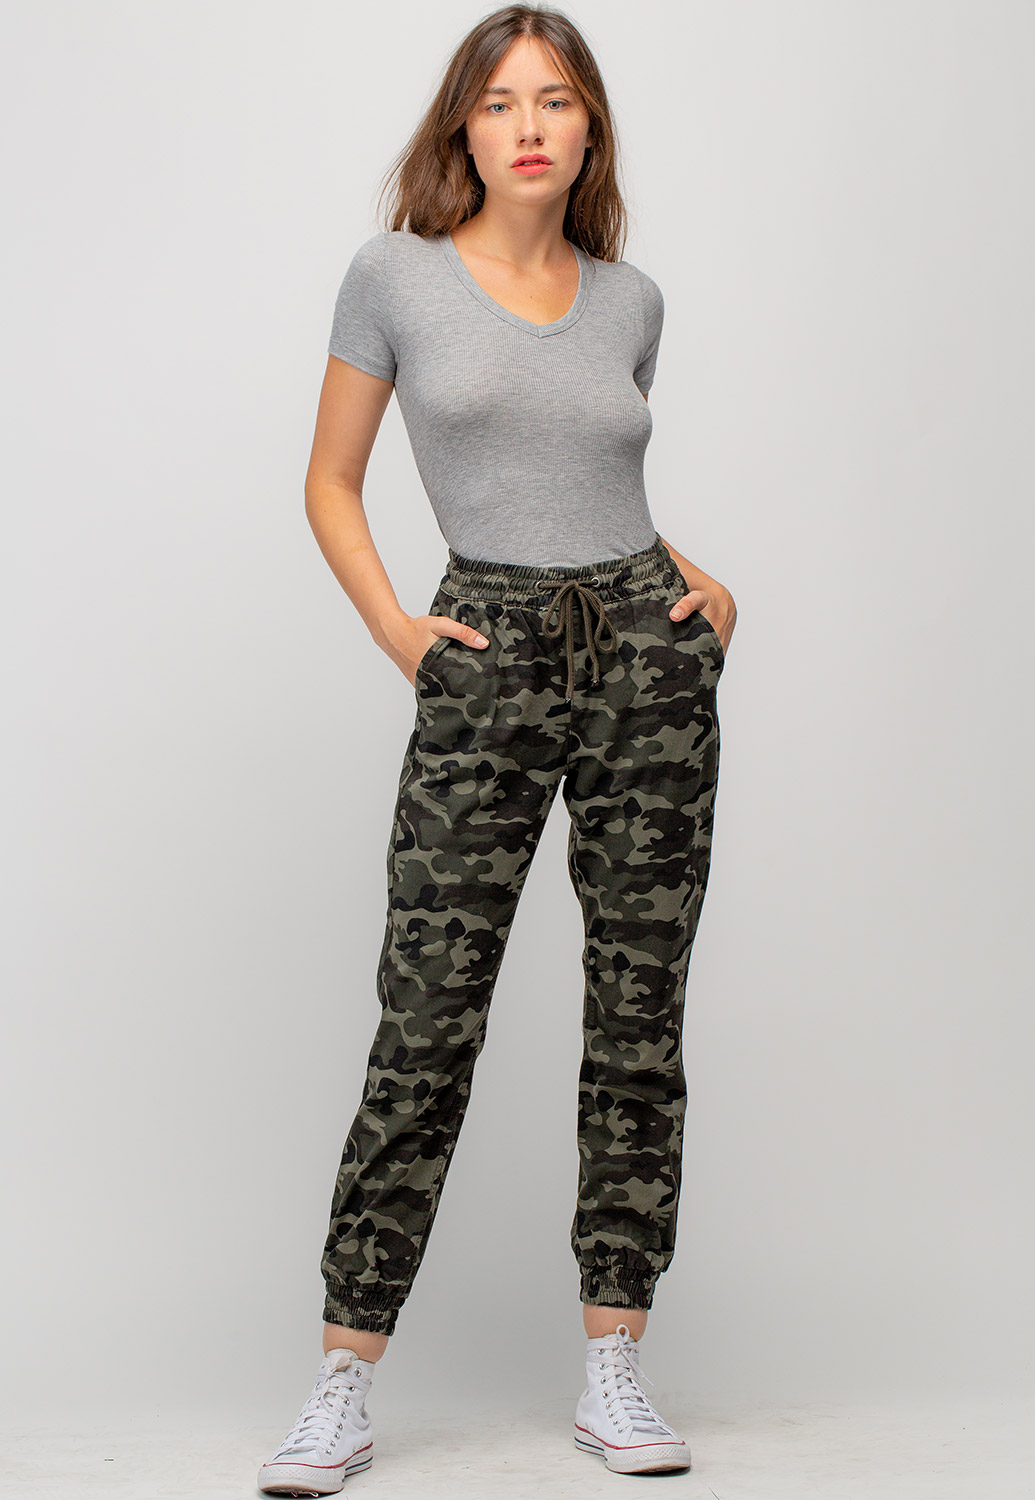 Camouflage Printed Jogger Pants